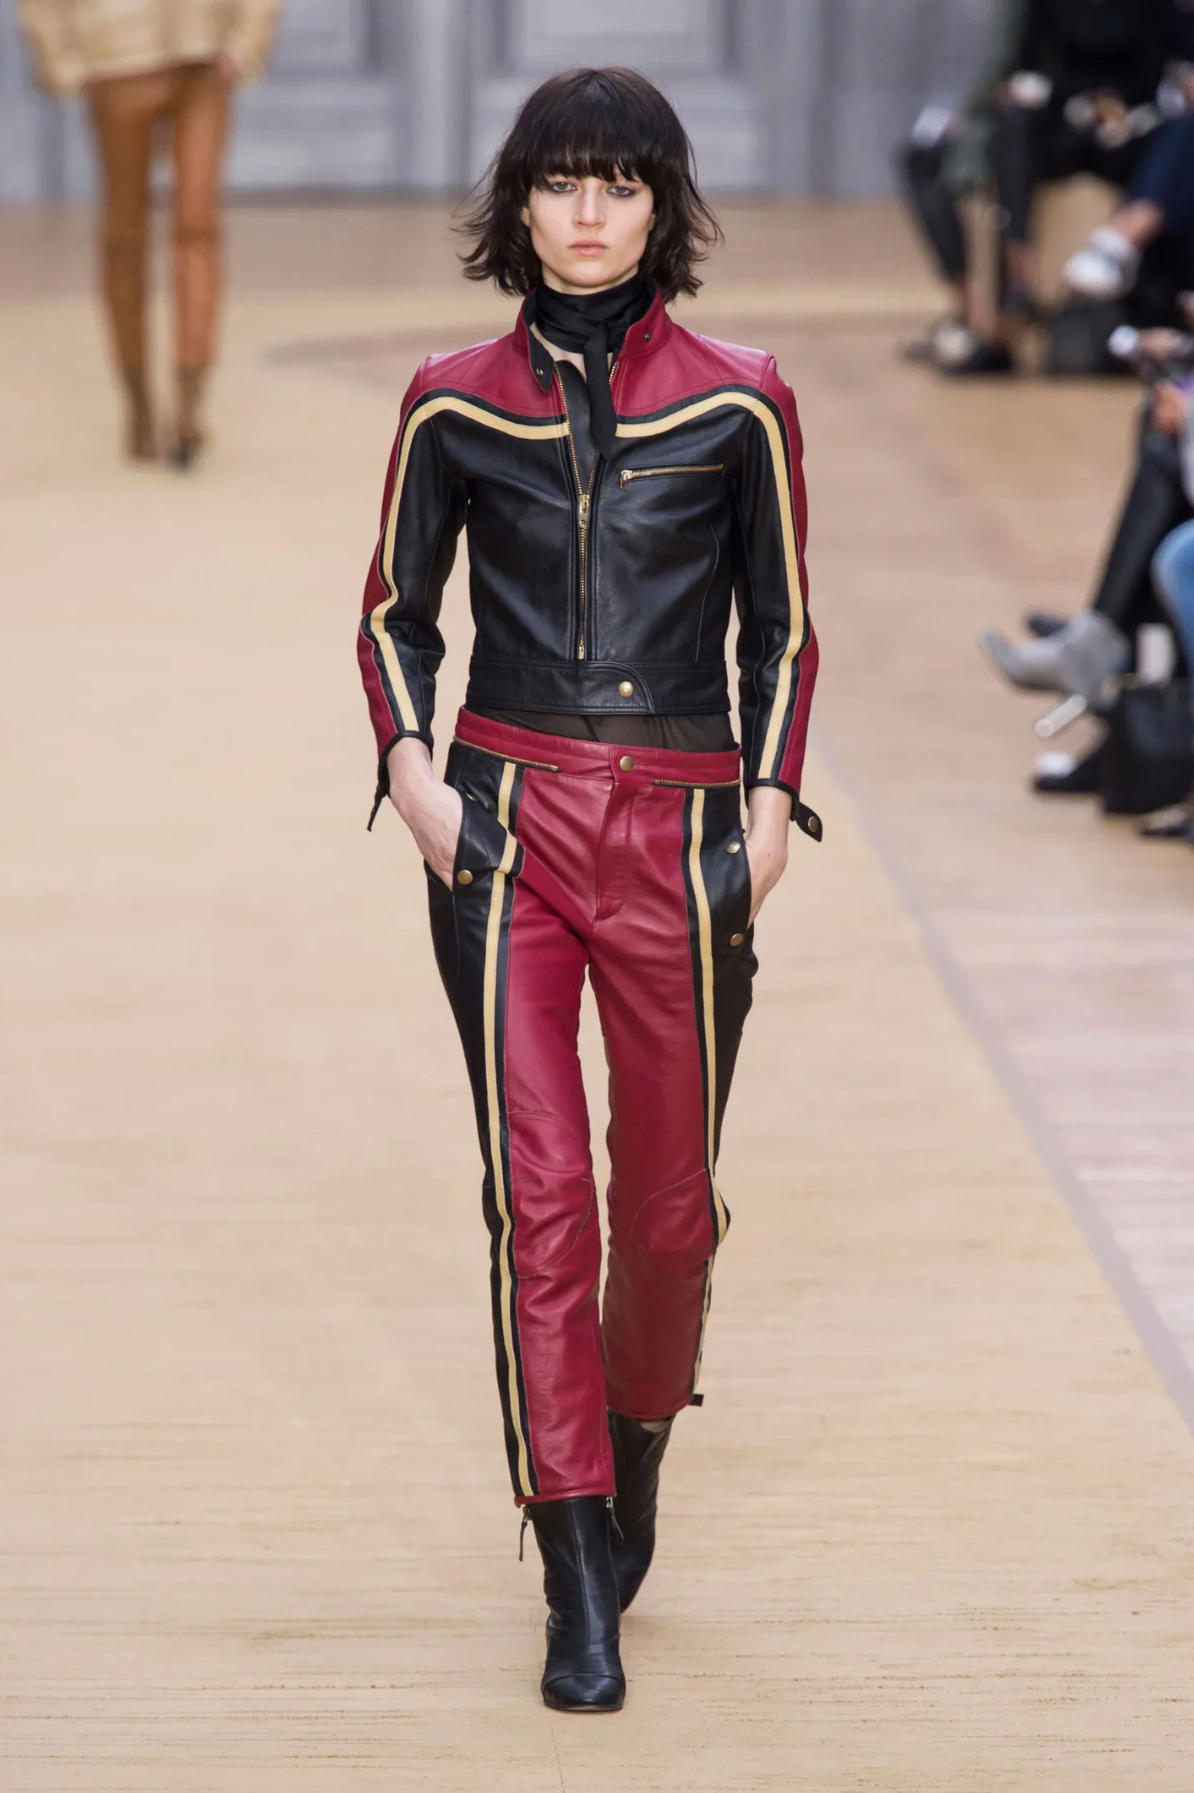 2016 F/W Leather Moto Pant by Chloe on model on runway from Vogue archive @recessla